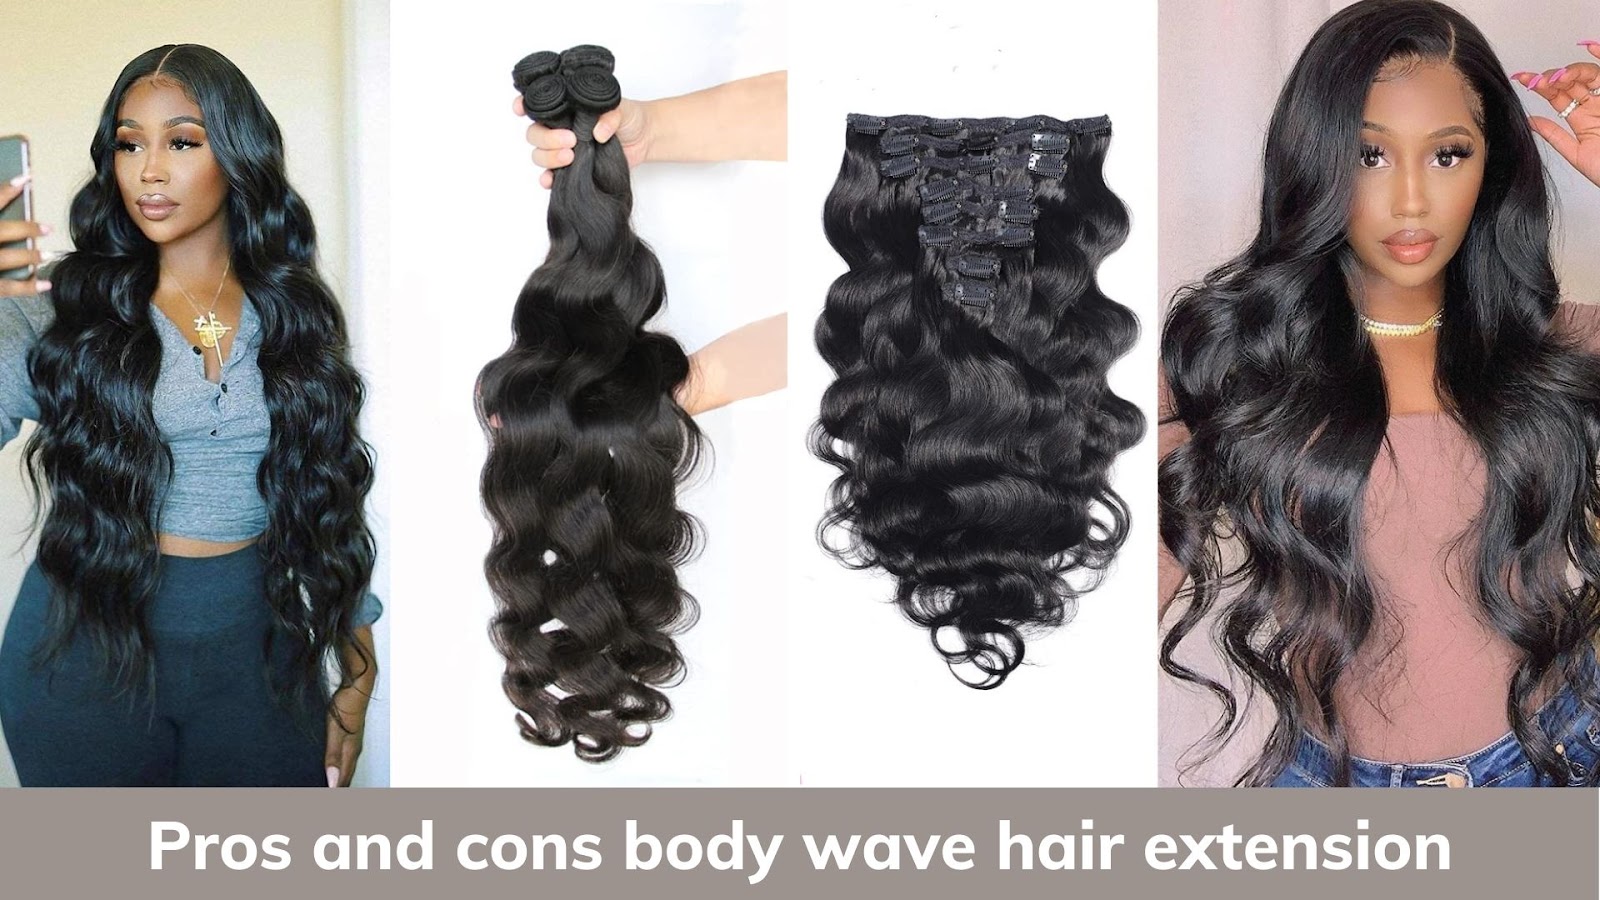 Pros and cons body wave hair extension